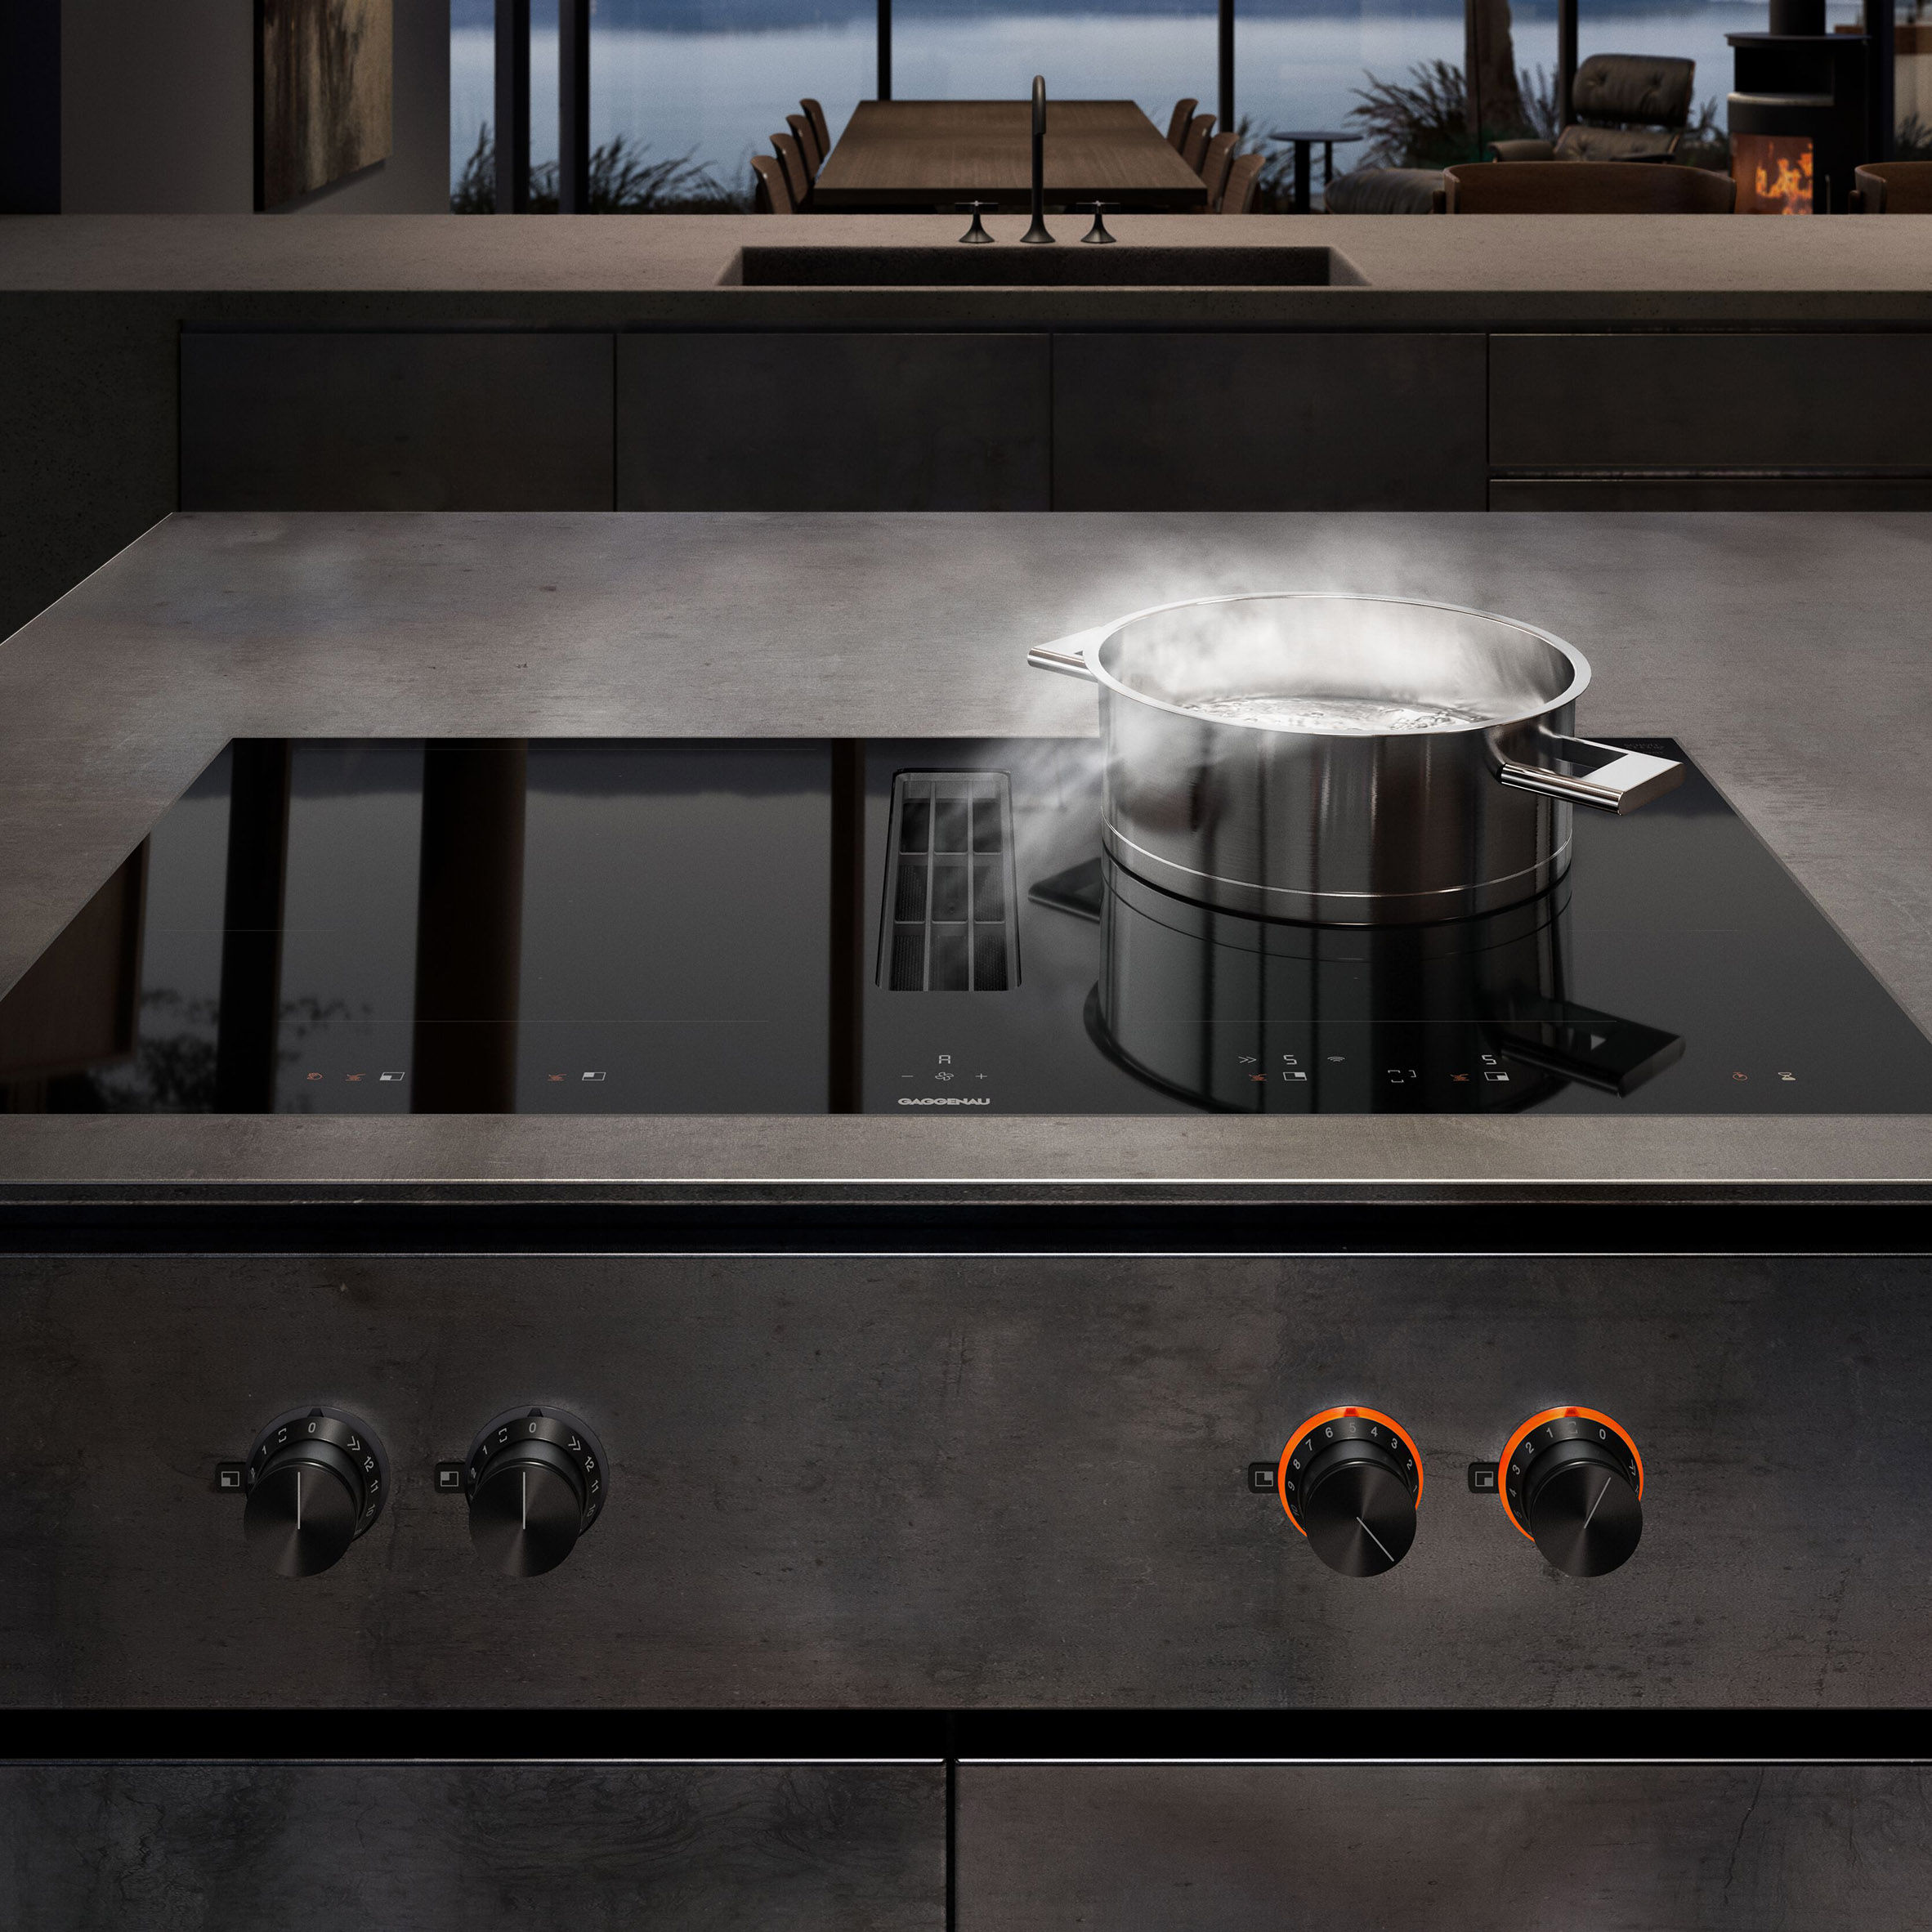 Induction Hob – Faster, Cleaner, and More Energy Efficient Cooking